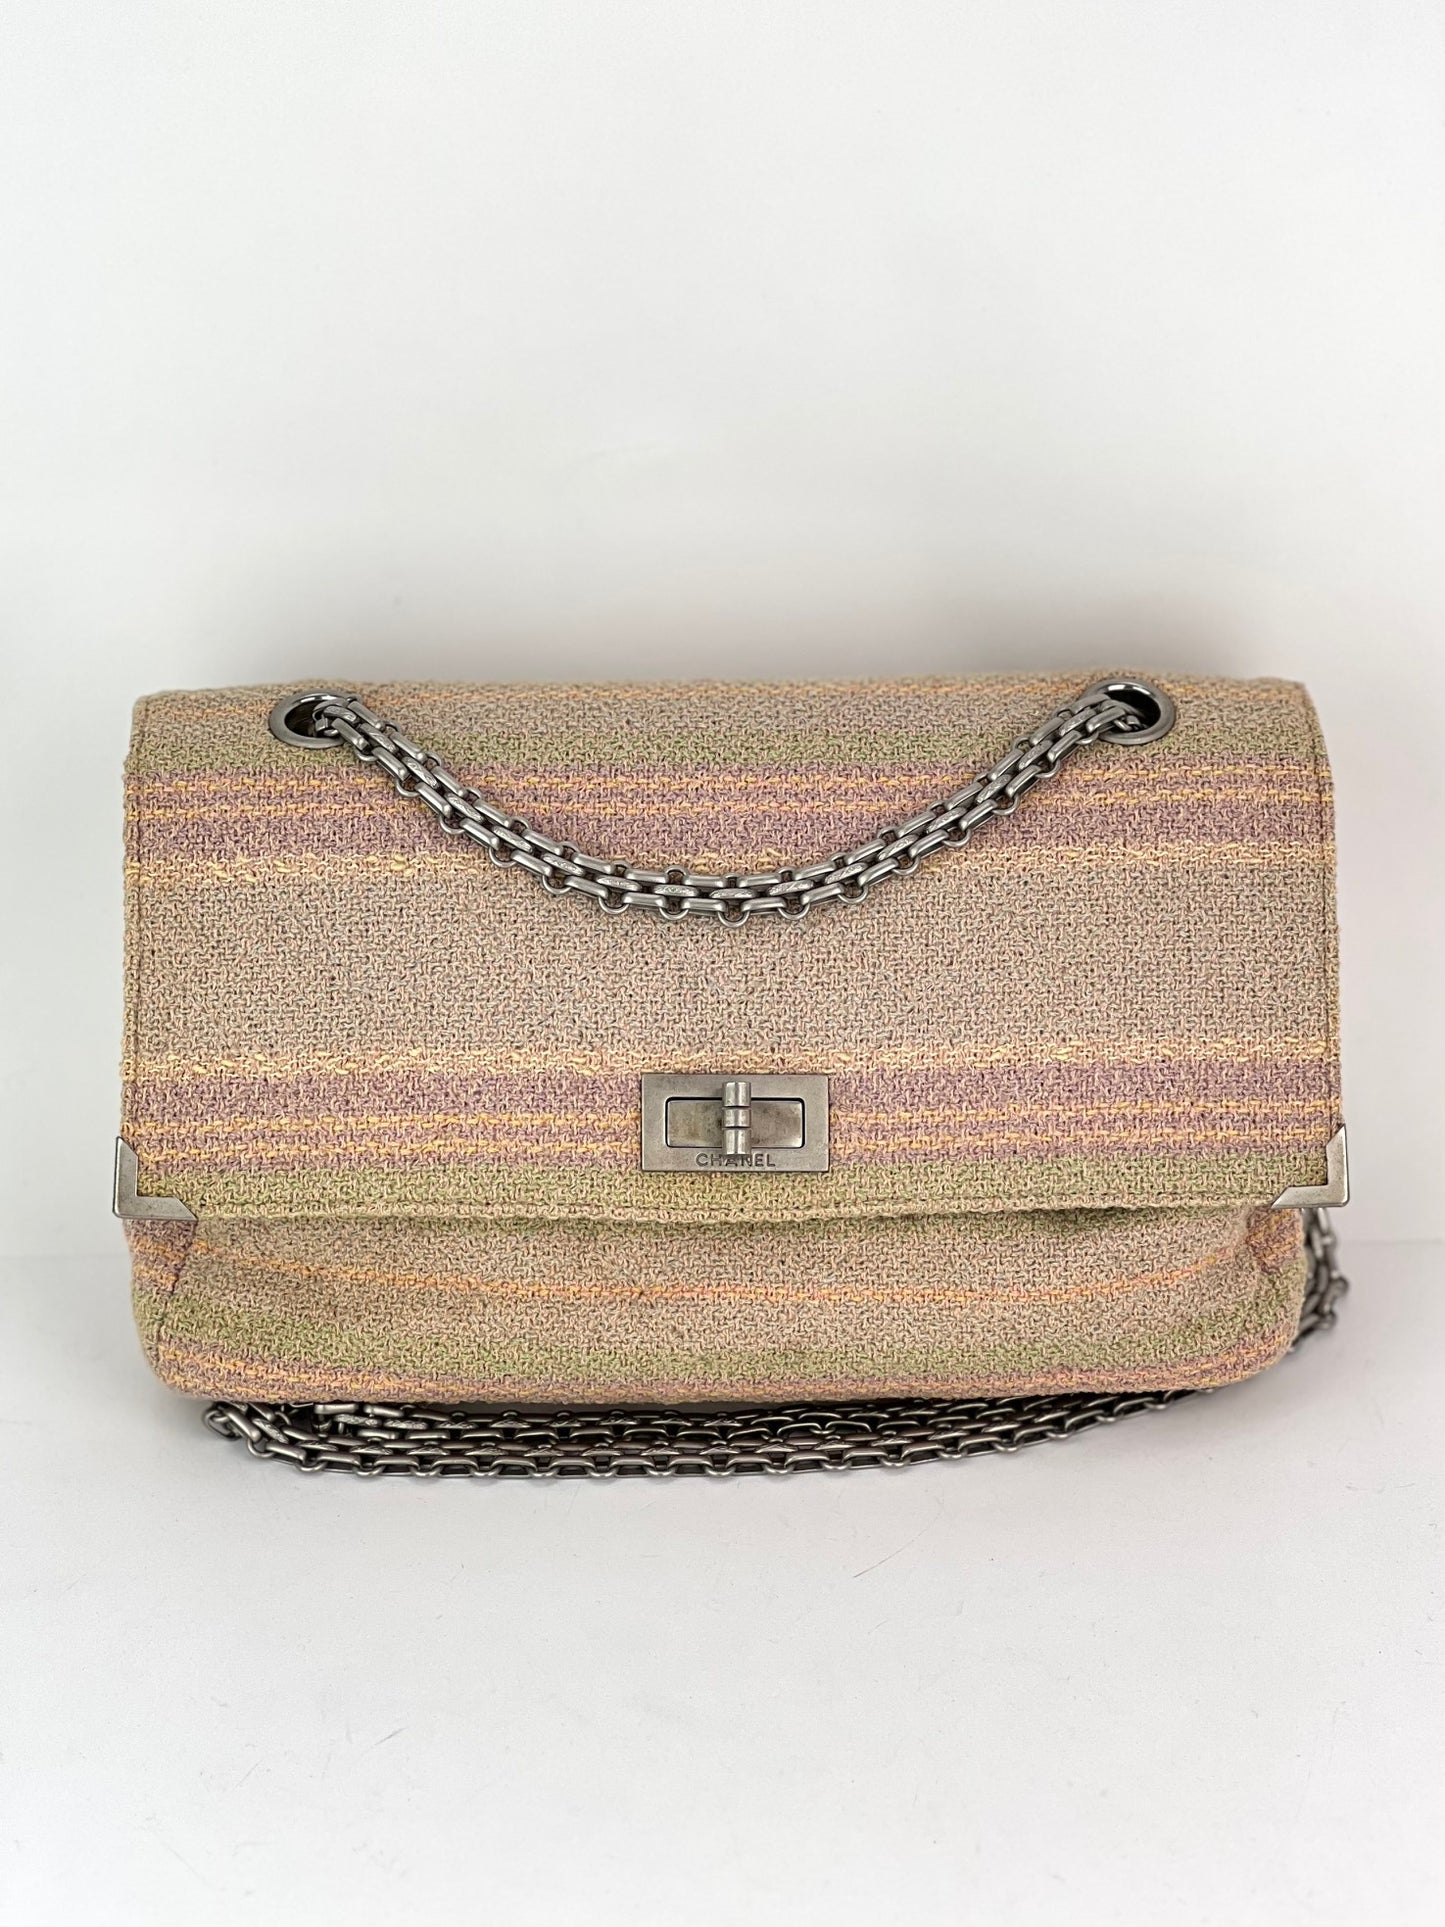 Chanel Reissue 225 Flap Cotton Tweed Bag Preowned